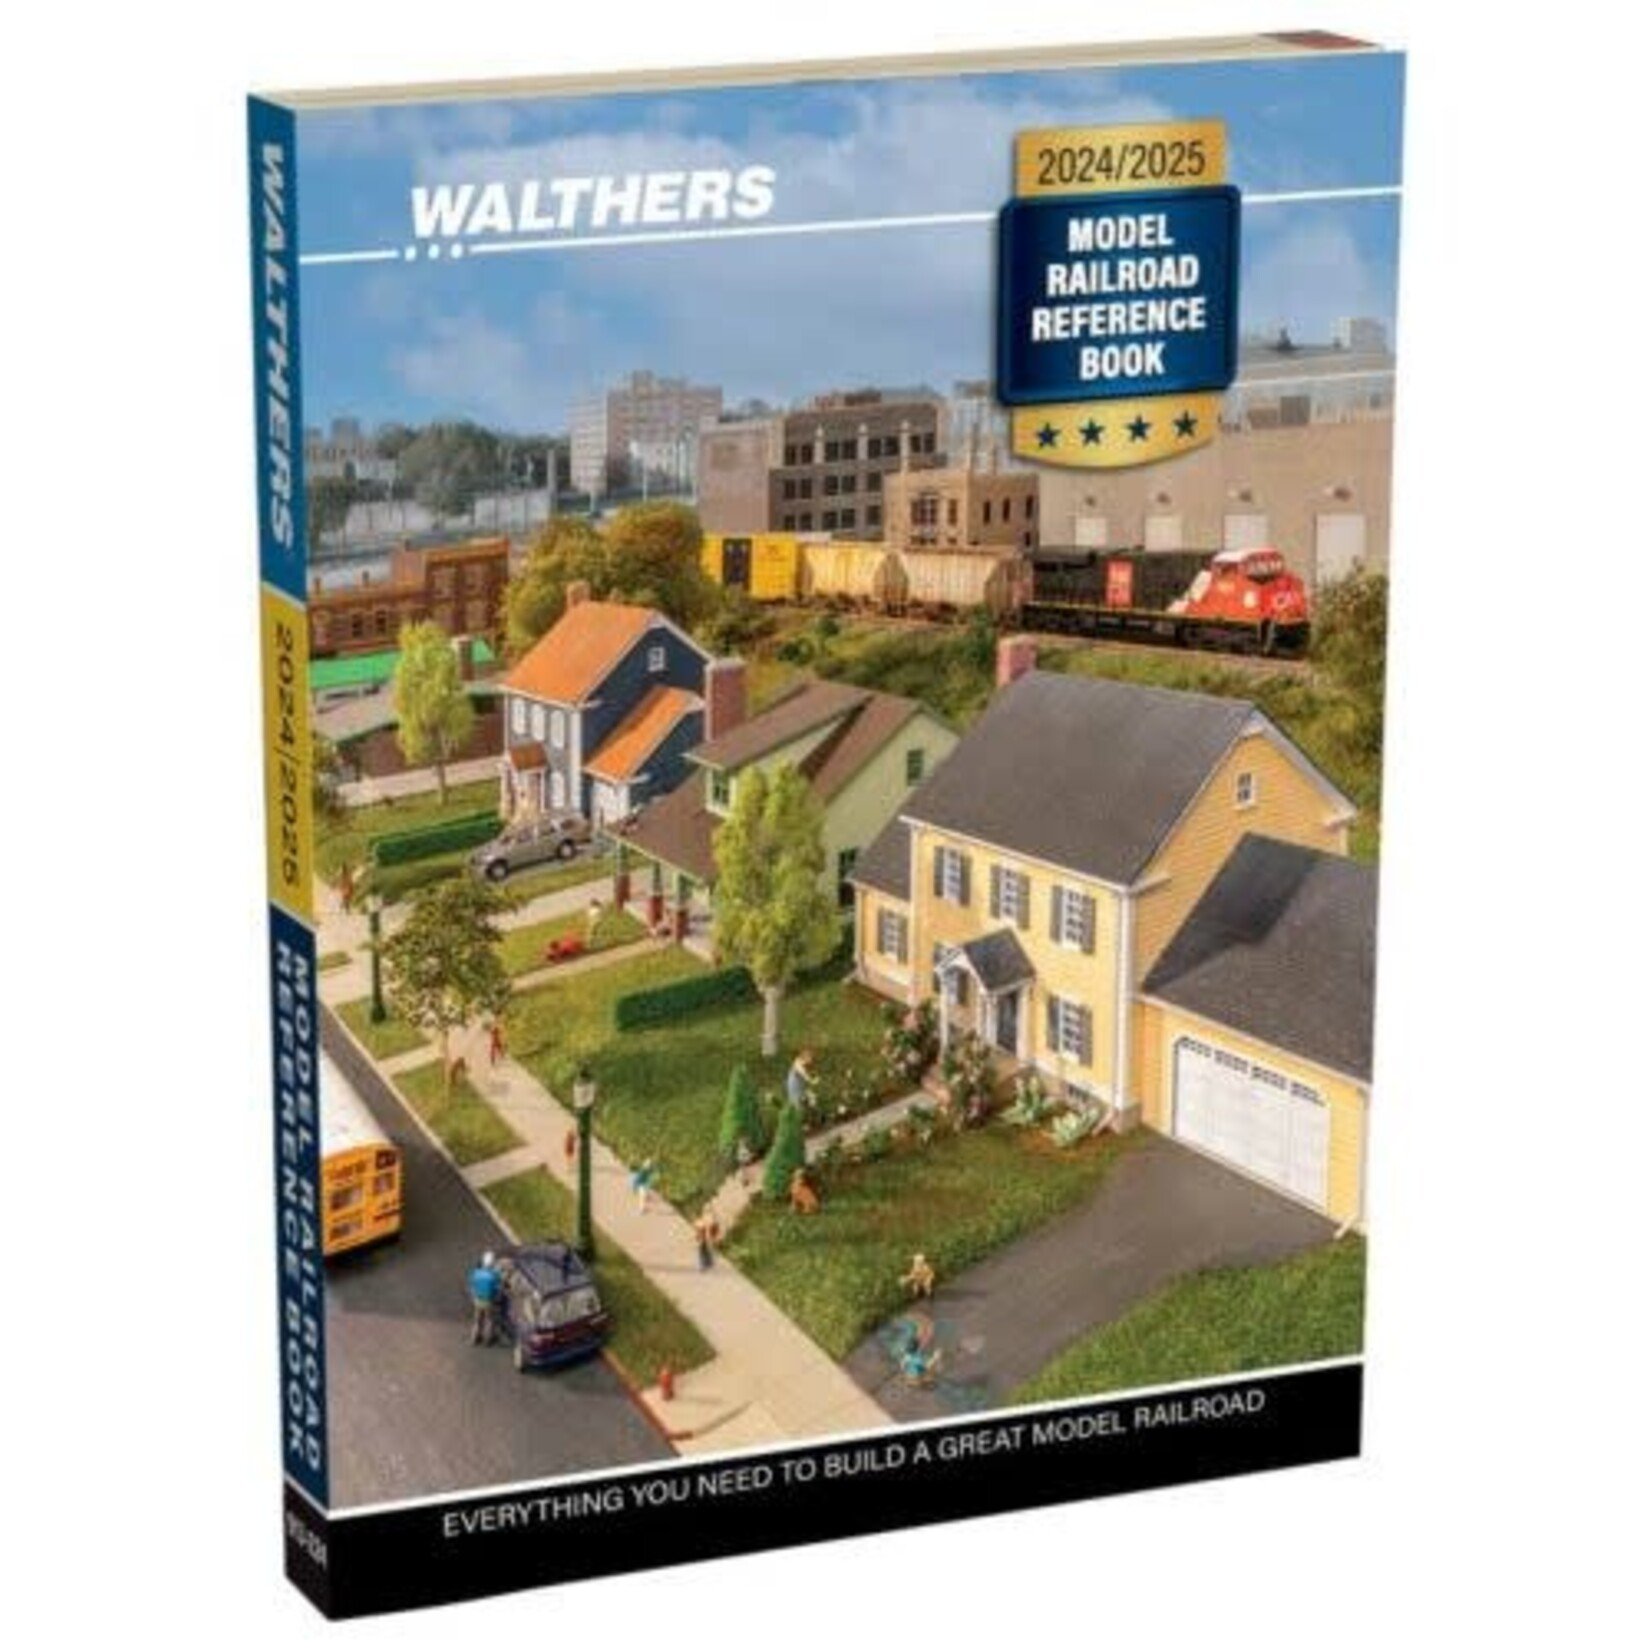 2024/2025 Walthers Model Railroad Reference Book Chuck's Trains